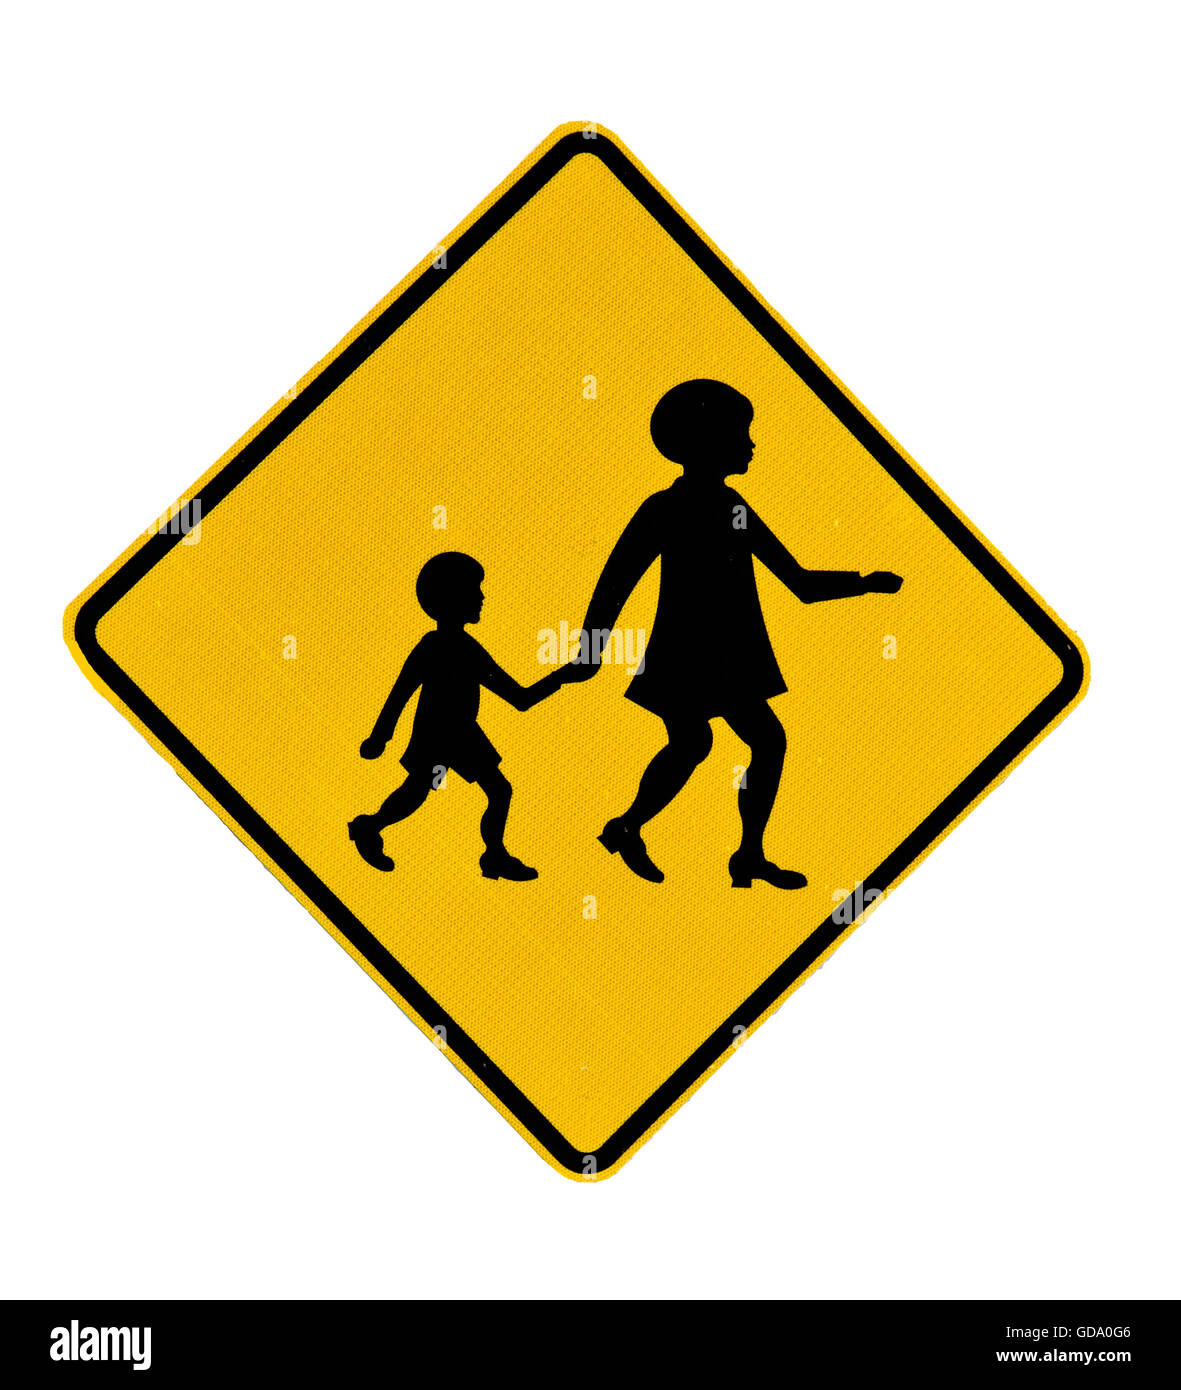 Children crossing road sign isolated Stock Photo